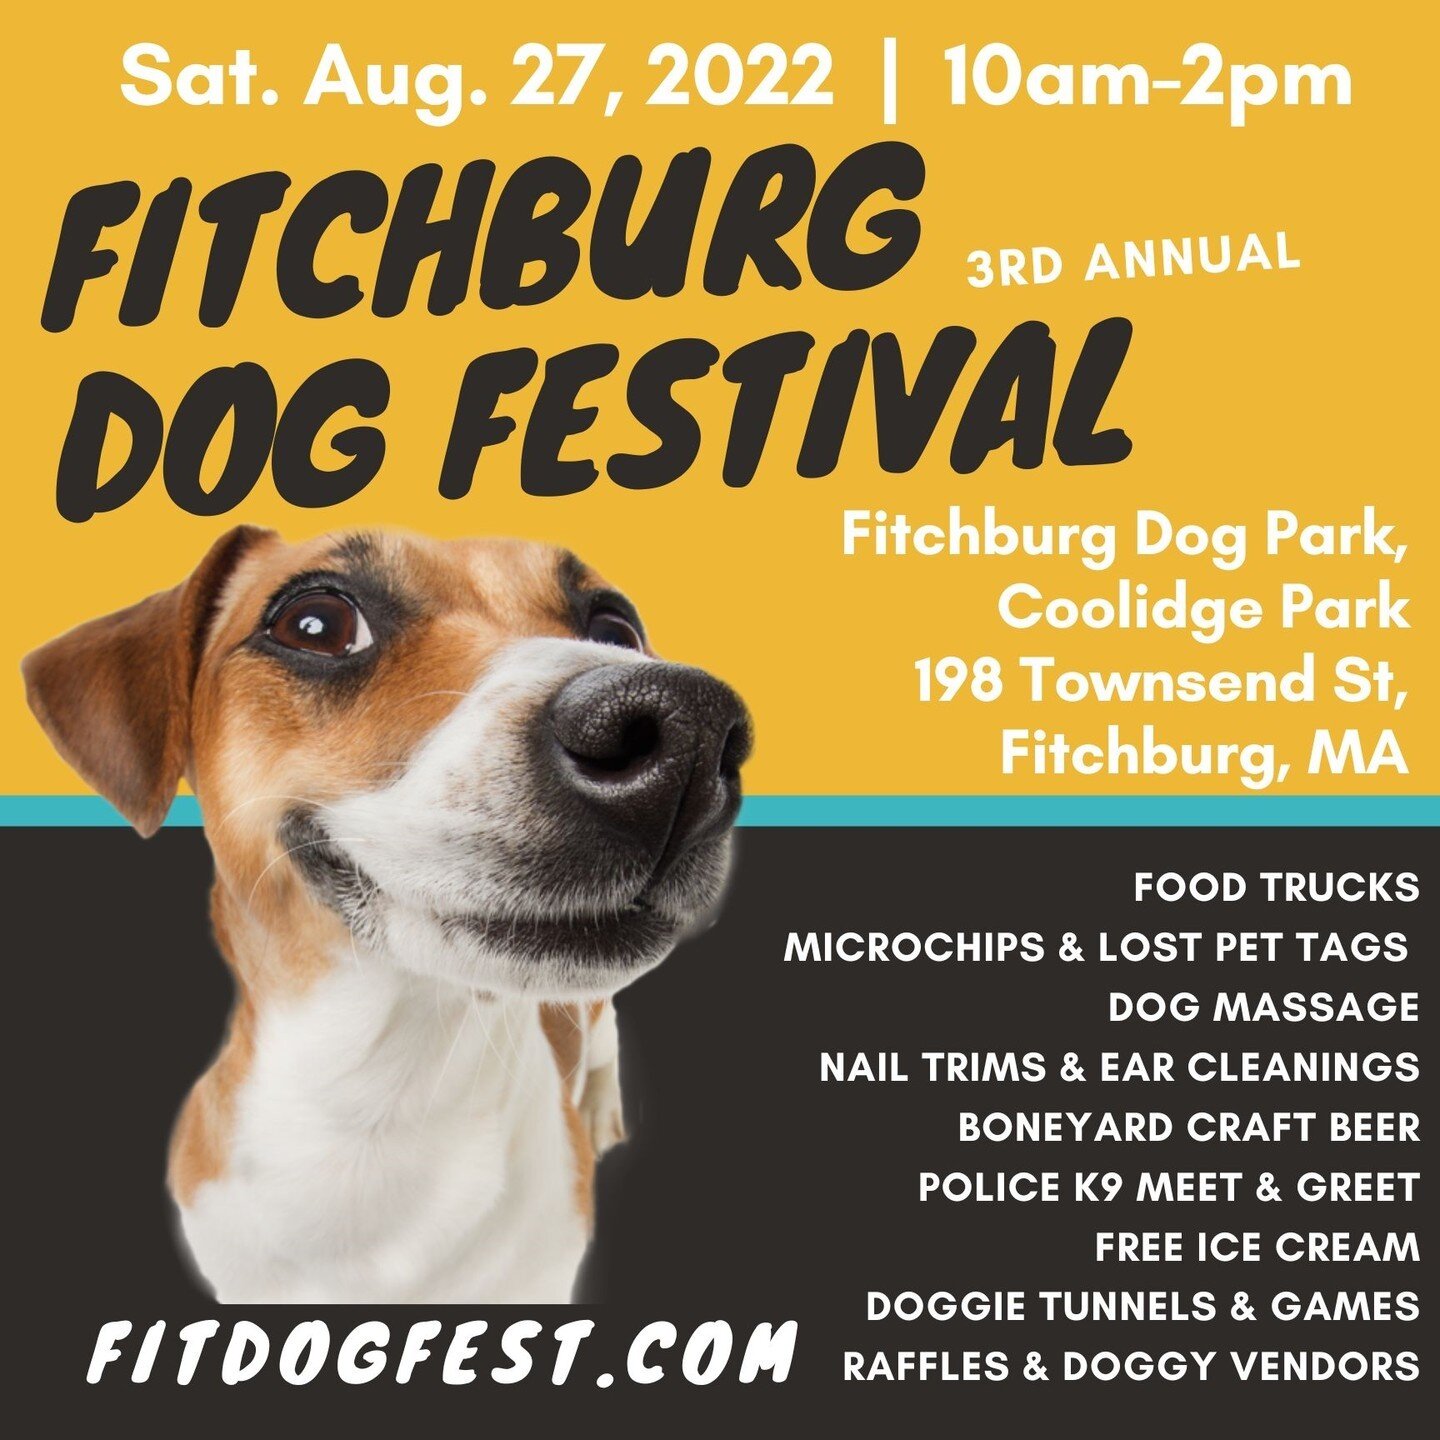 Schedule for the  Fitchburg Dog Festival 3rd Annual 8.27.22 10am-2pm